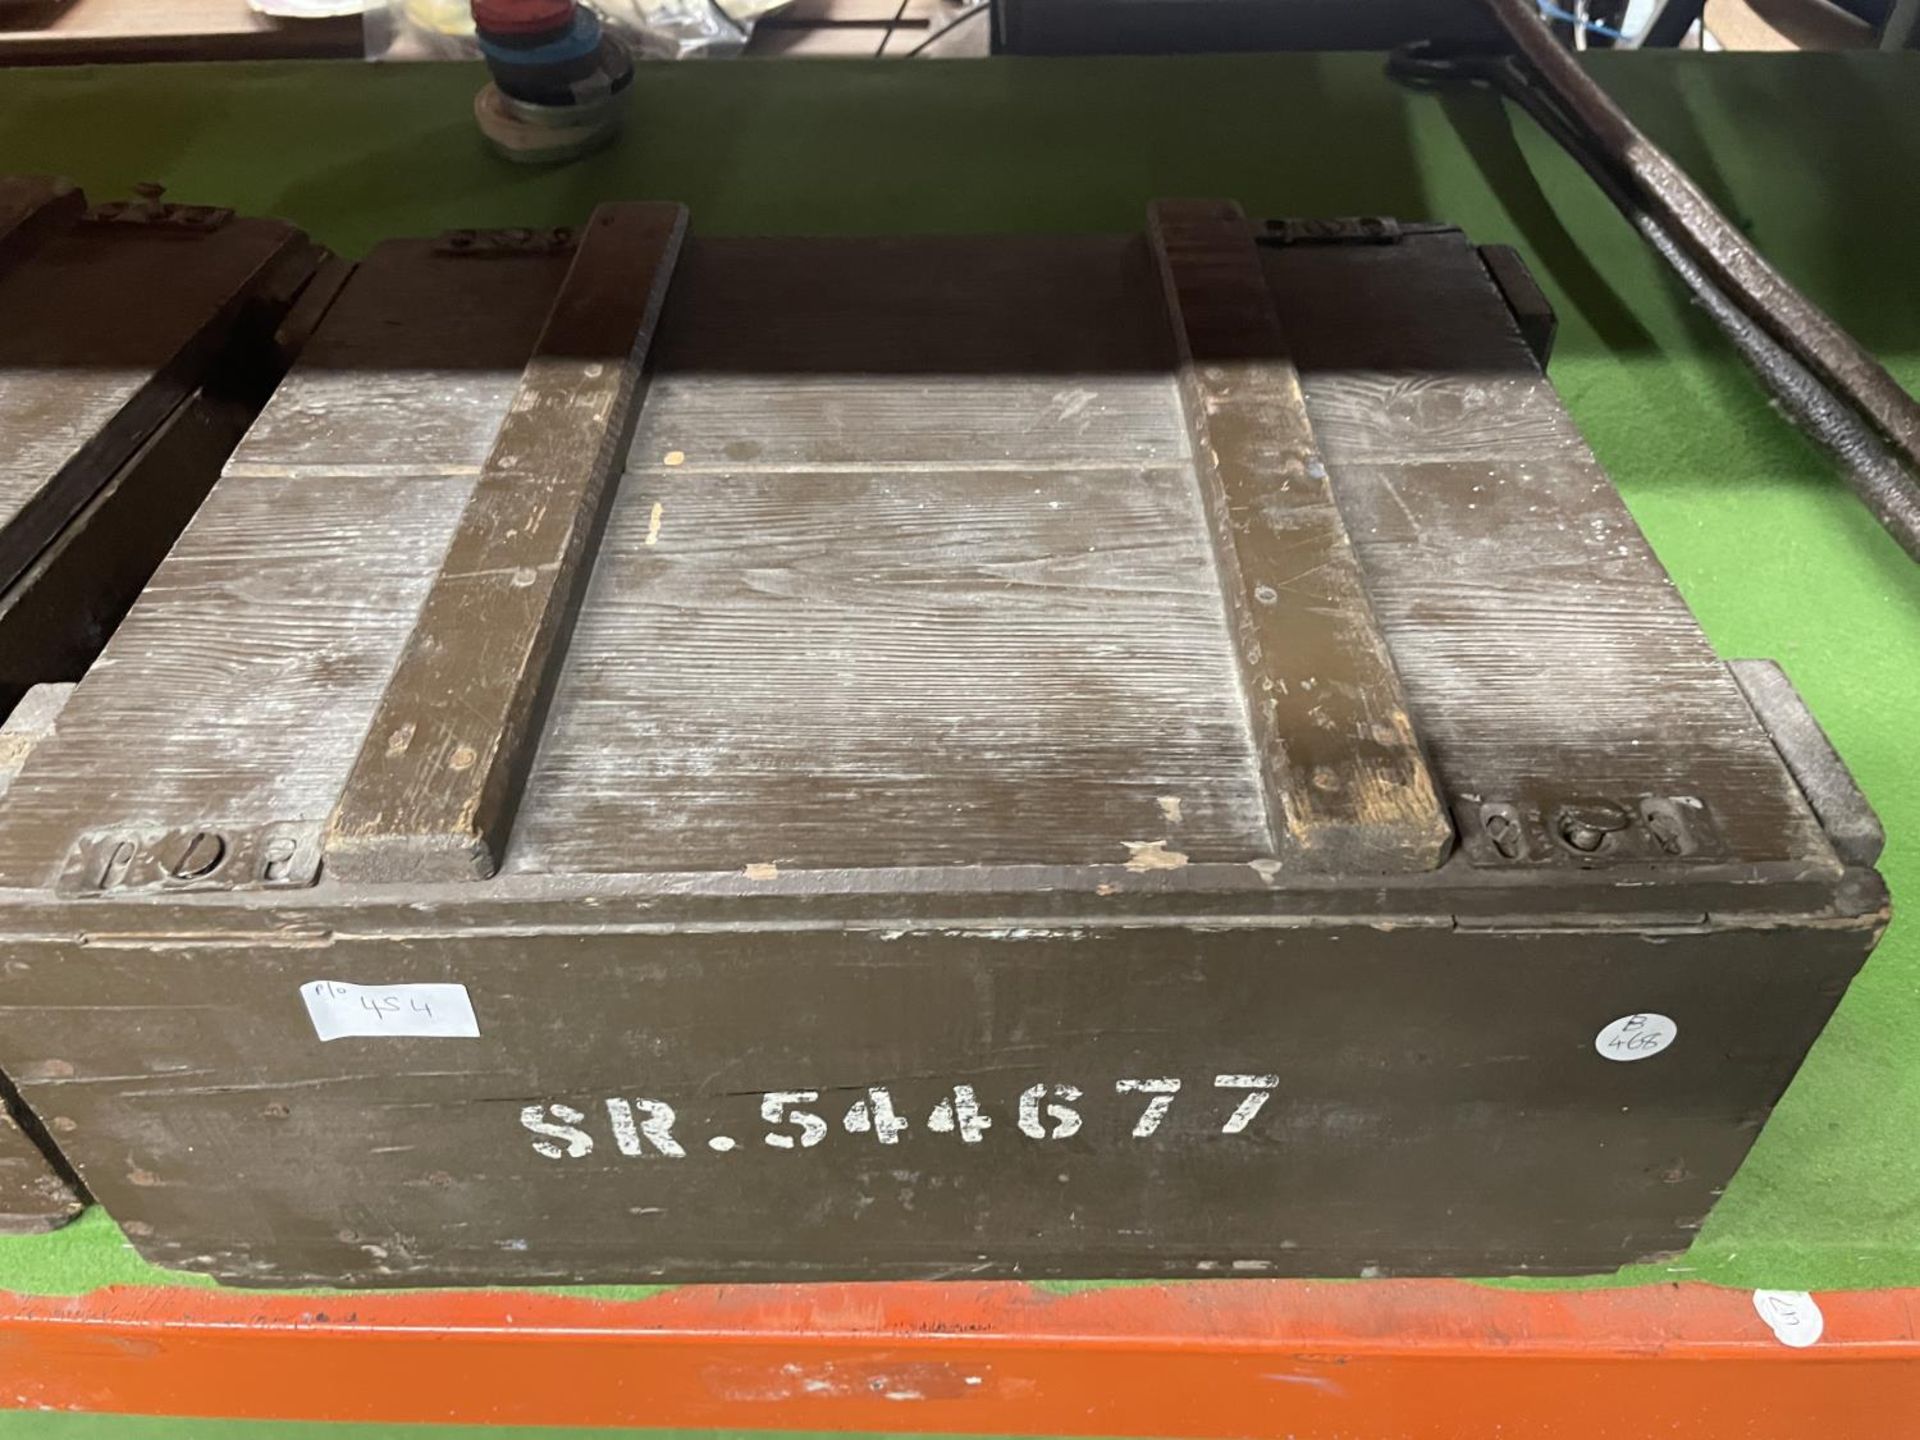 TWO GREEN PAINTED AMMUNITION BOXES MARKED SR 544677, AND A 1950 MILITARY ENAMEL PLATE (3) - Bild 3 aus 3